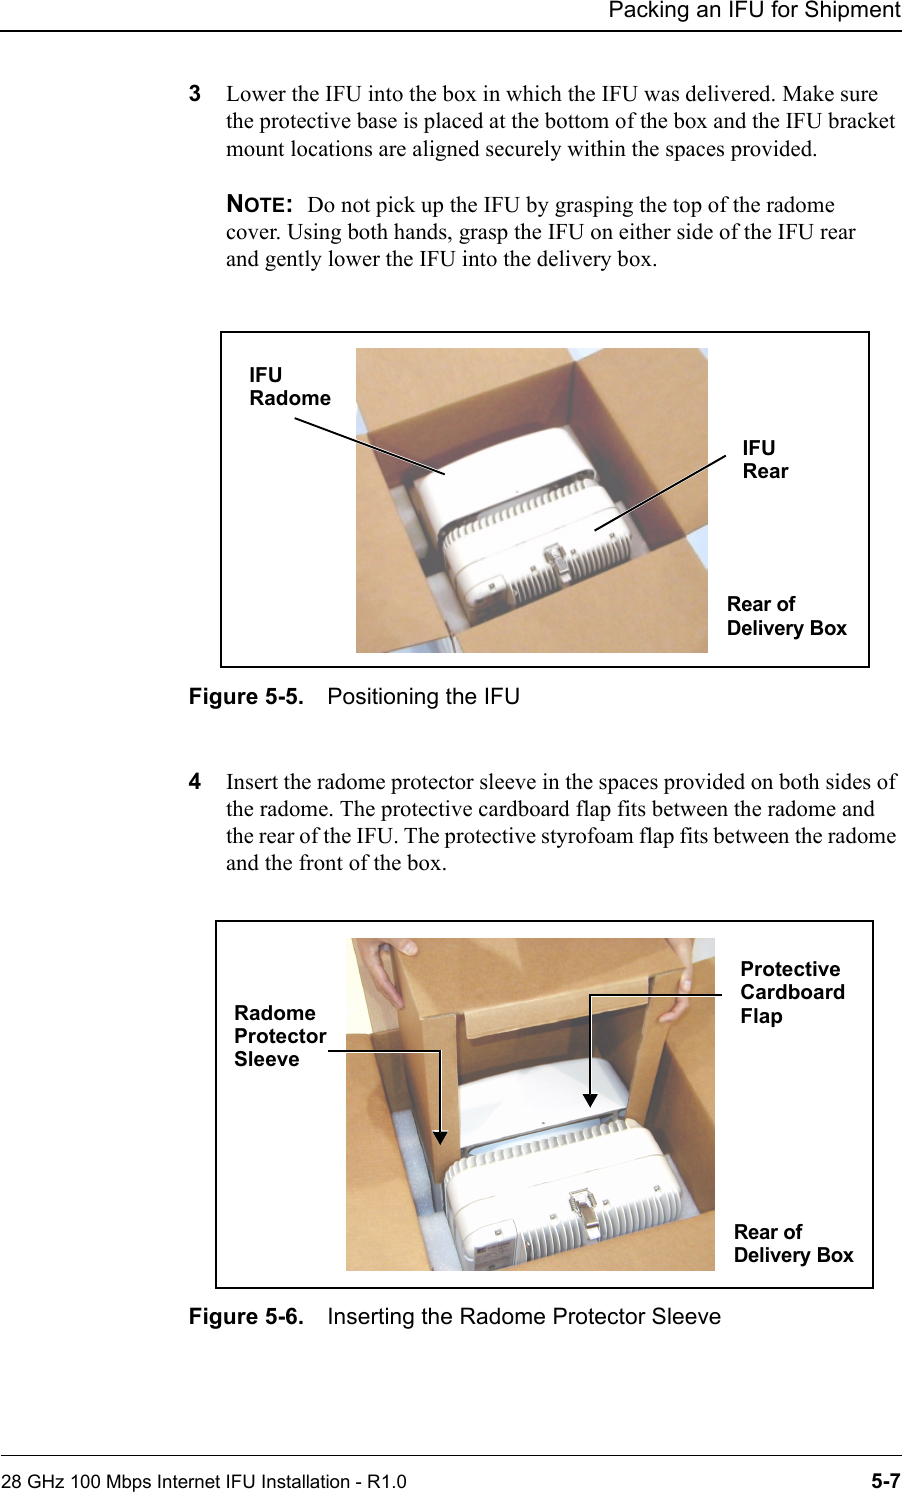 Packing an IFU for Shipment28 GHz 100 Mbps Internet IFU Installation - R1.0 5-73Lower the IFU into the box in which the IFU was delivered. Make sure the protective base is placed at the bottom of the box and the IFU bracket mount locations are aligned securely within the spaces provided.NOTE:  Do not pick up the IFU by grasping the top of the radome cover. Using both hands, grasp the IFU on either side of the IFU rear and gently lower the IFU into the delivery box.Figure 5-5. Positioning the IFU 4Insert the radome protector sleeve in the spaces provided on both sides of the radome. The protective cardboard flap fits between the radome and the rear of the IFU. The protective styrofoam flap fits between the radome and the front of the box. Figure 5-6. Inserting the Radome Protector SleeveIFU IFU RadomeRear of RearDelivery BoxRadome Box RearProtective Protector SleeveRear of Delivery Box CardboardFlap